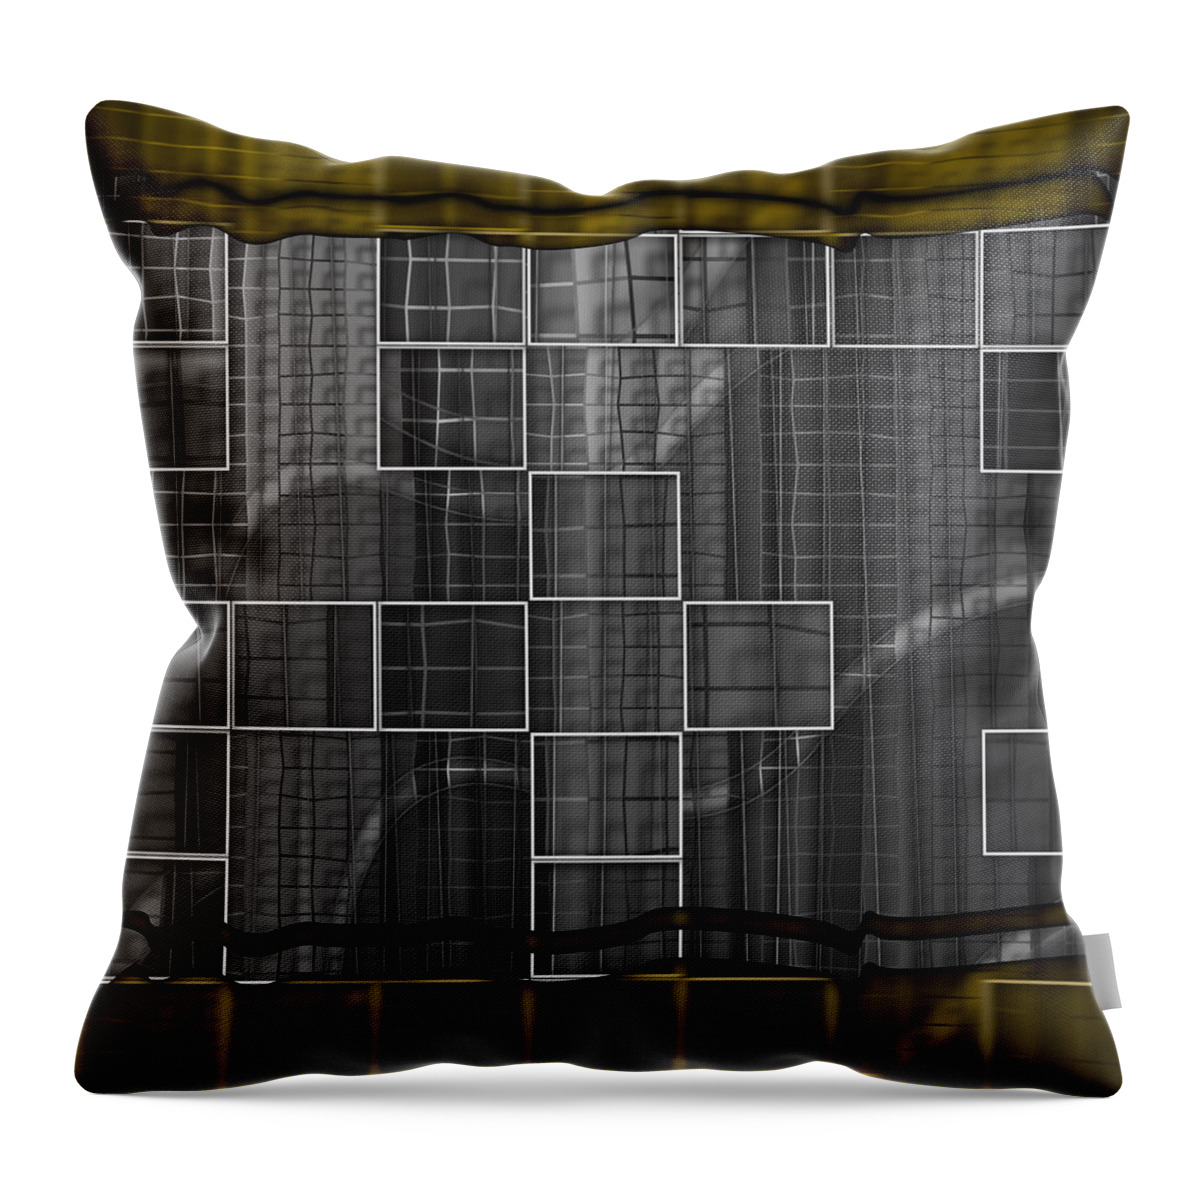 Abstract Throw Pillow featuring the digital art Pattern 33 by Marko Sabotin